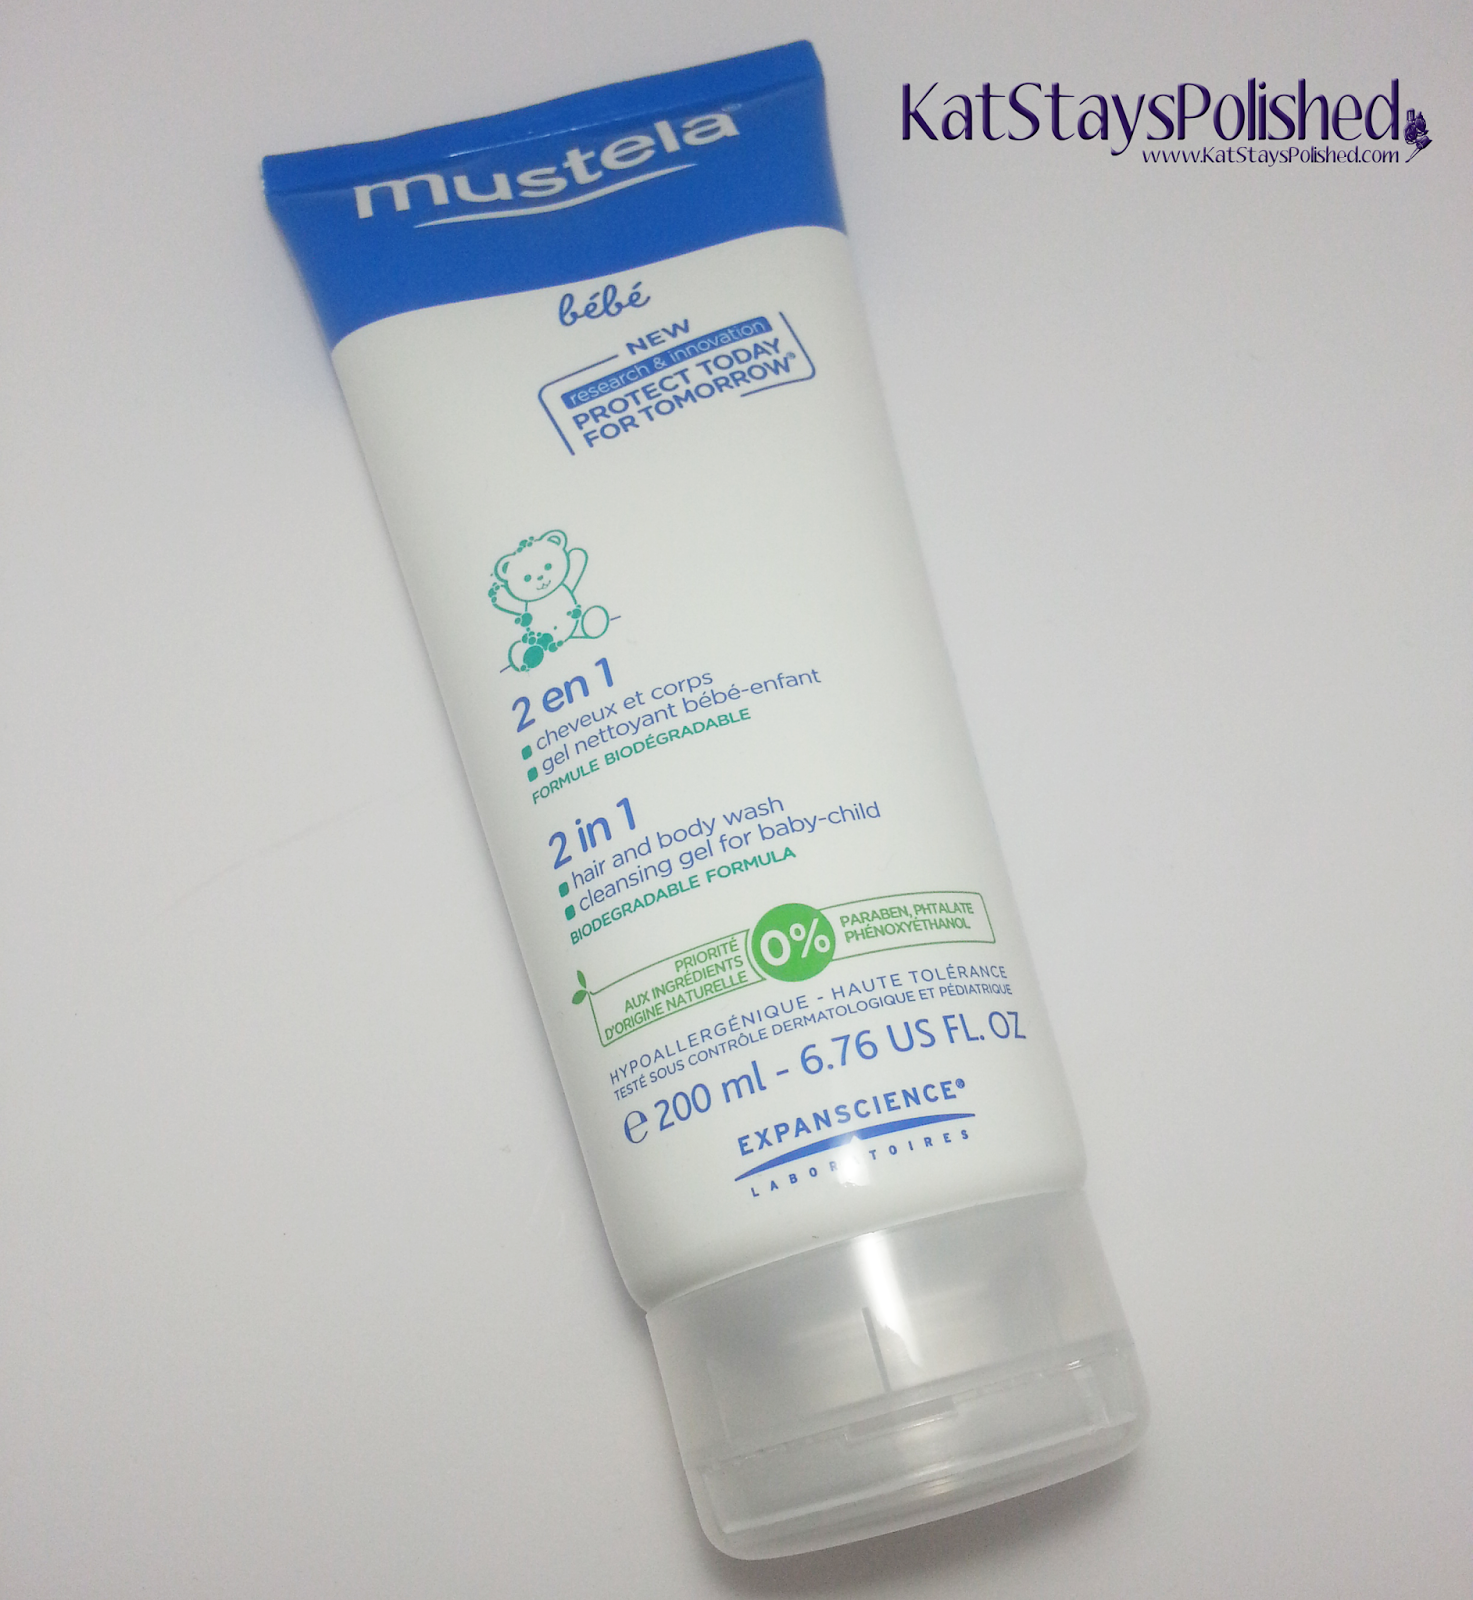 Mustela 2-in-1 Hair and Body Wash | Kat Stays Polished